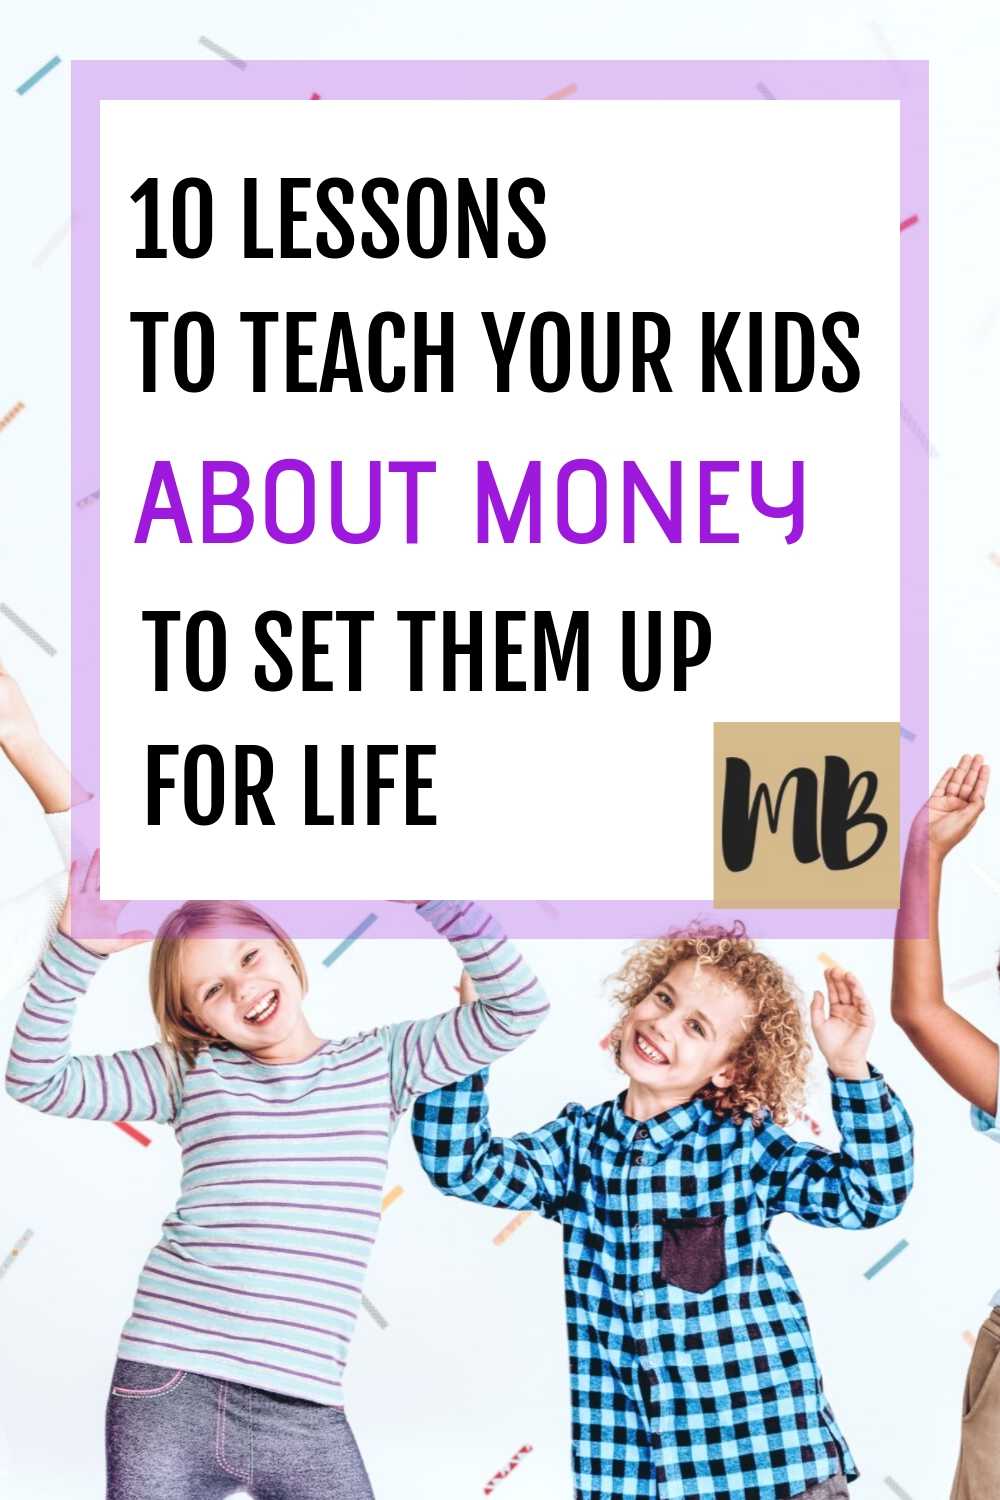 Before it's too late here are 10 lessons to teach your kids about money to set them up for life, inspired by mr money mustache